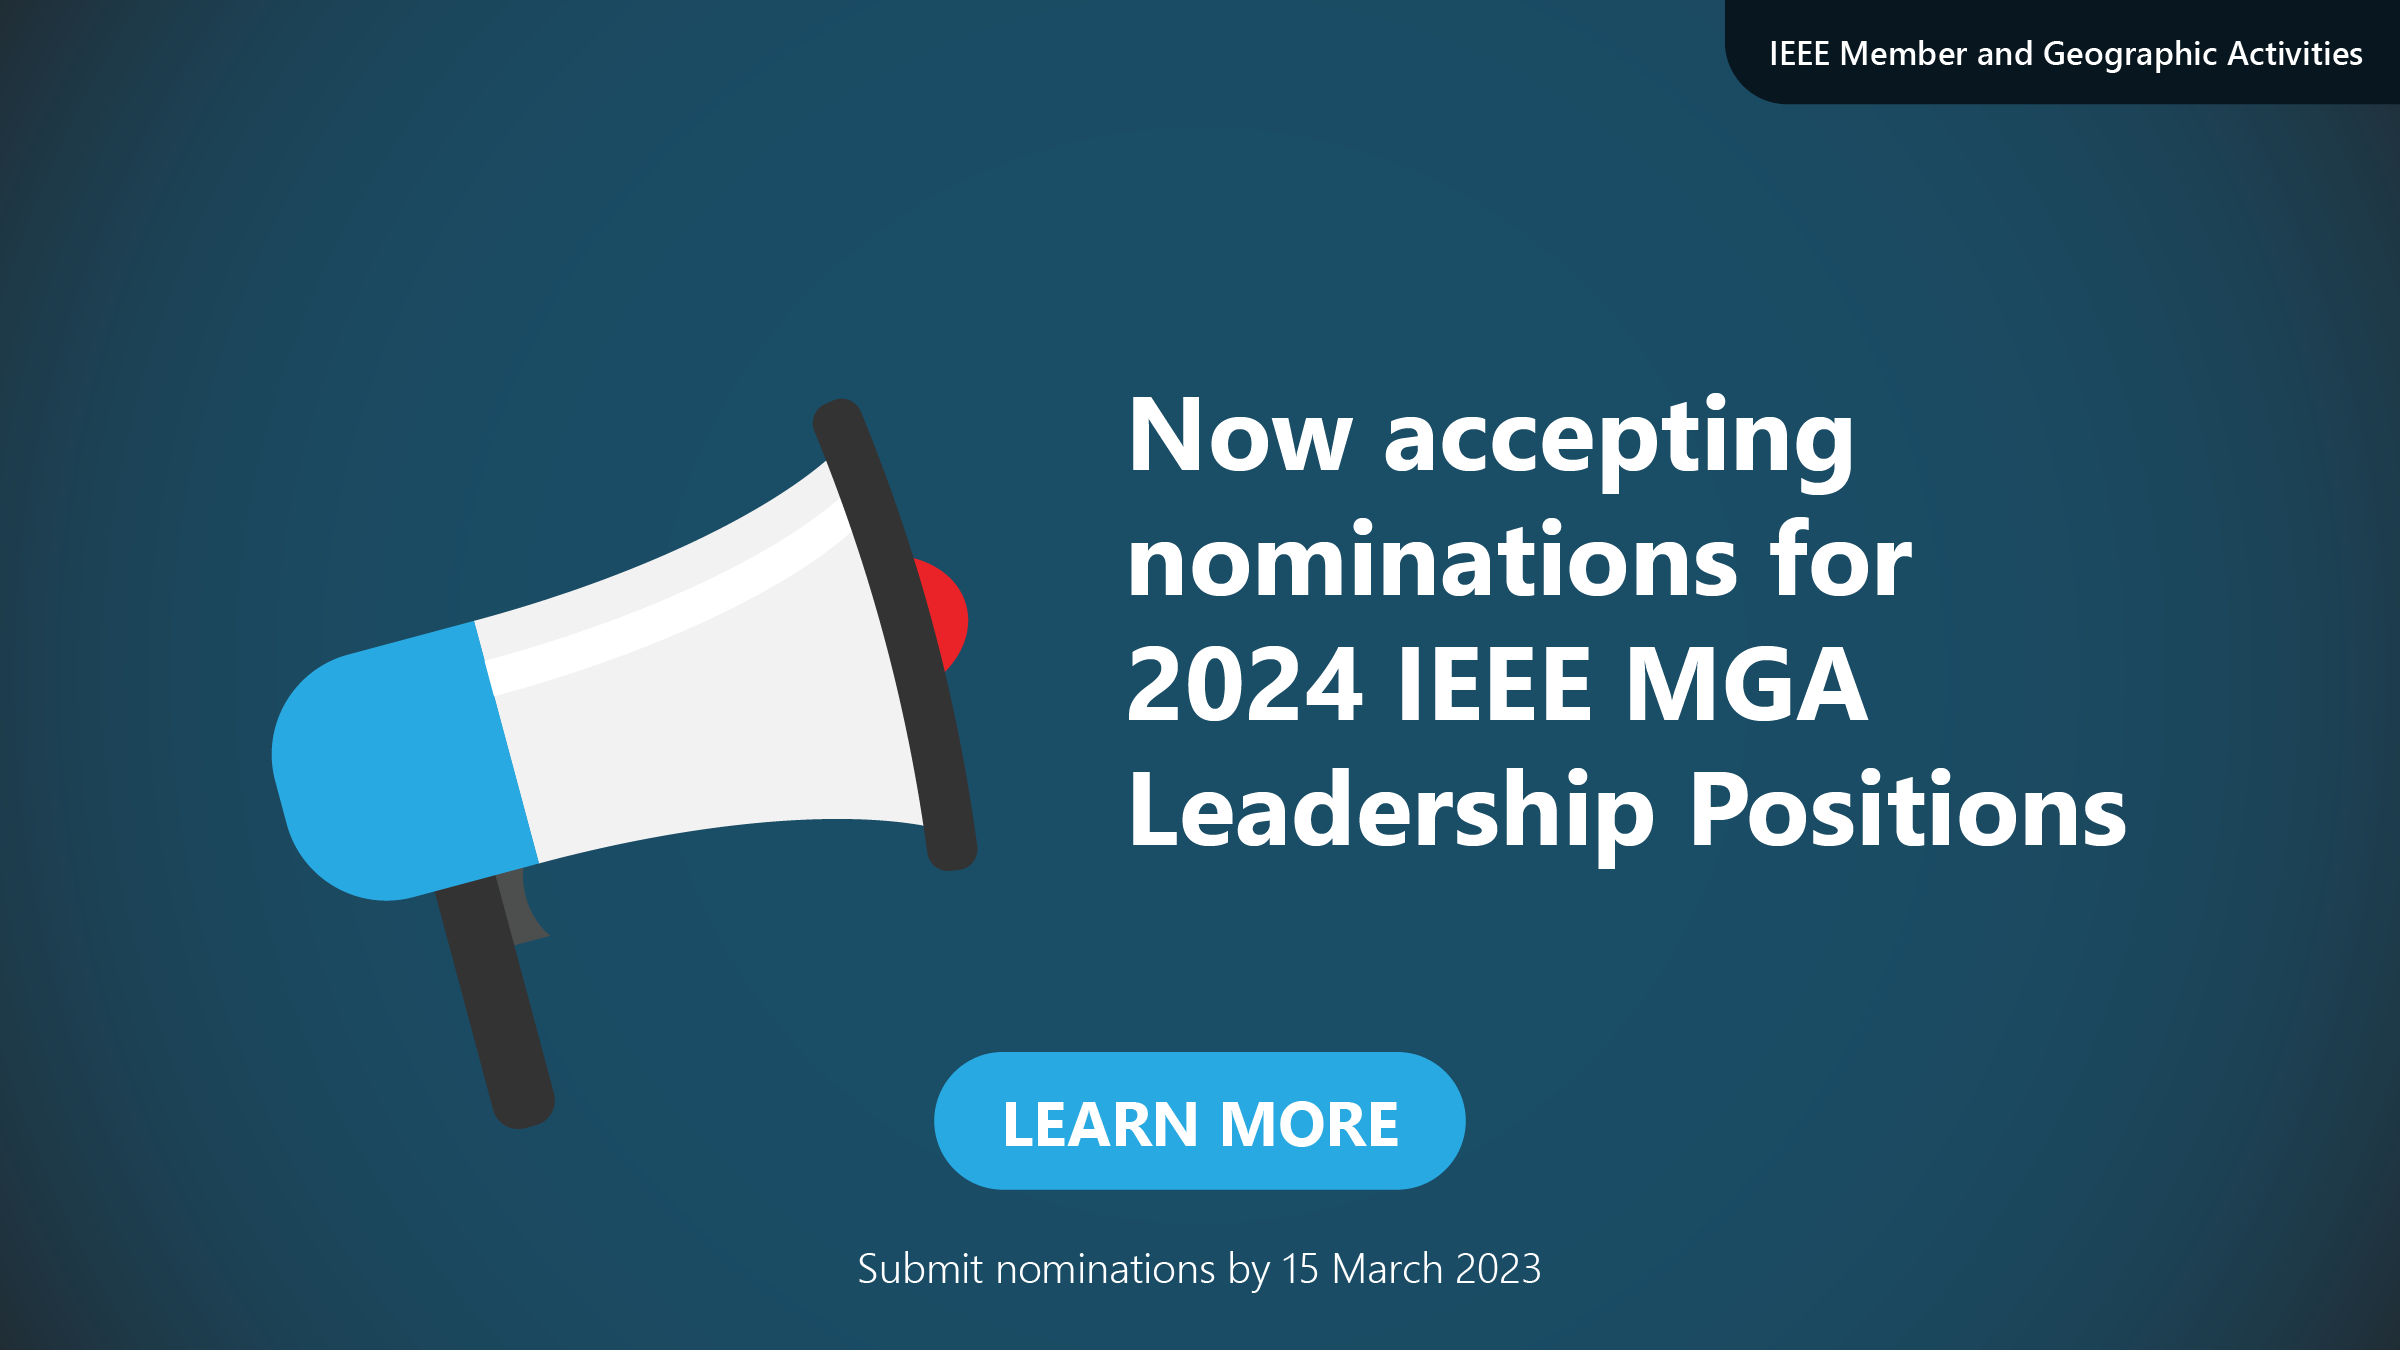 2024 Call for Nominations